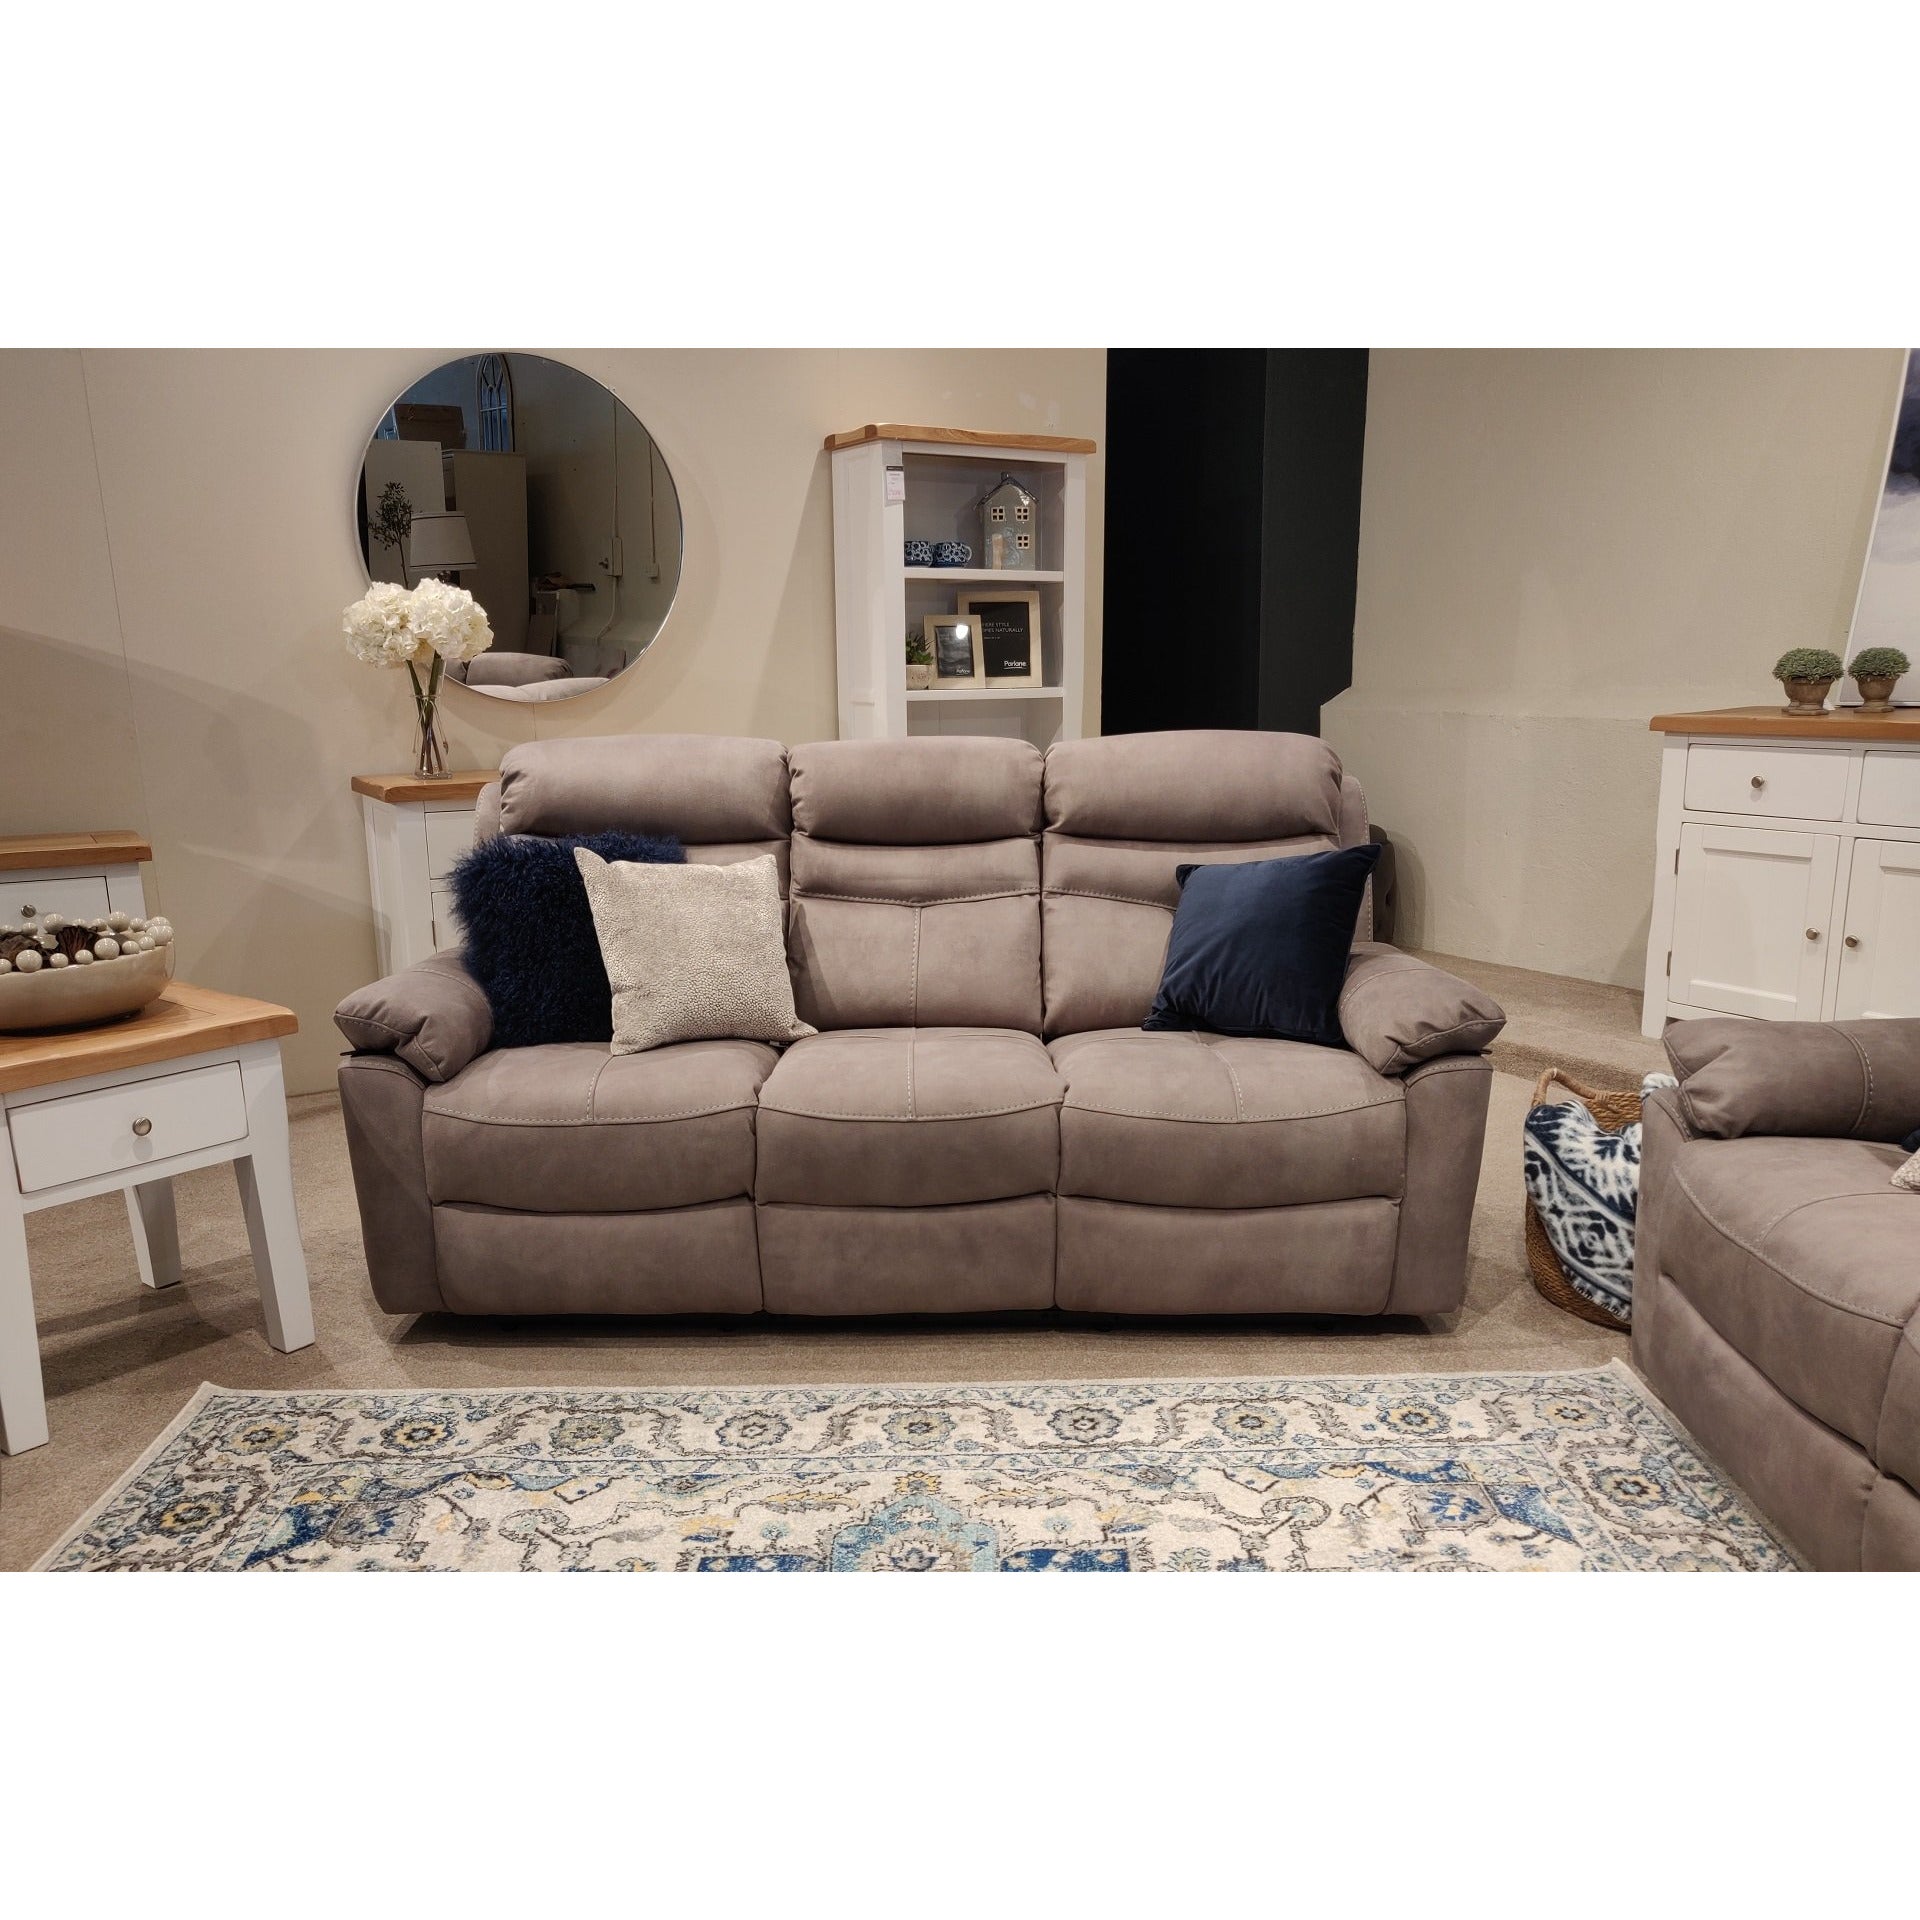 Lucy 3 Seater Recliner Grey from Upstairs Downstairs Furniture in Lisburn, Monaghan and Enniskillen